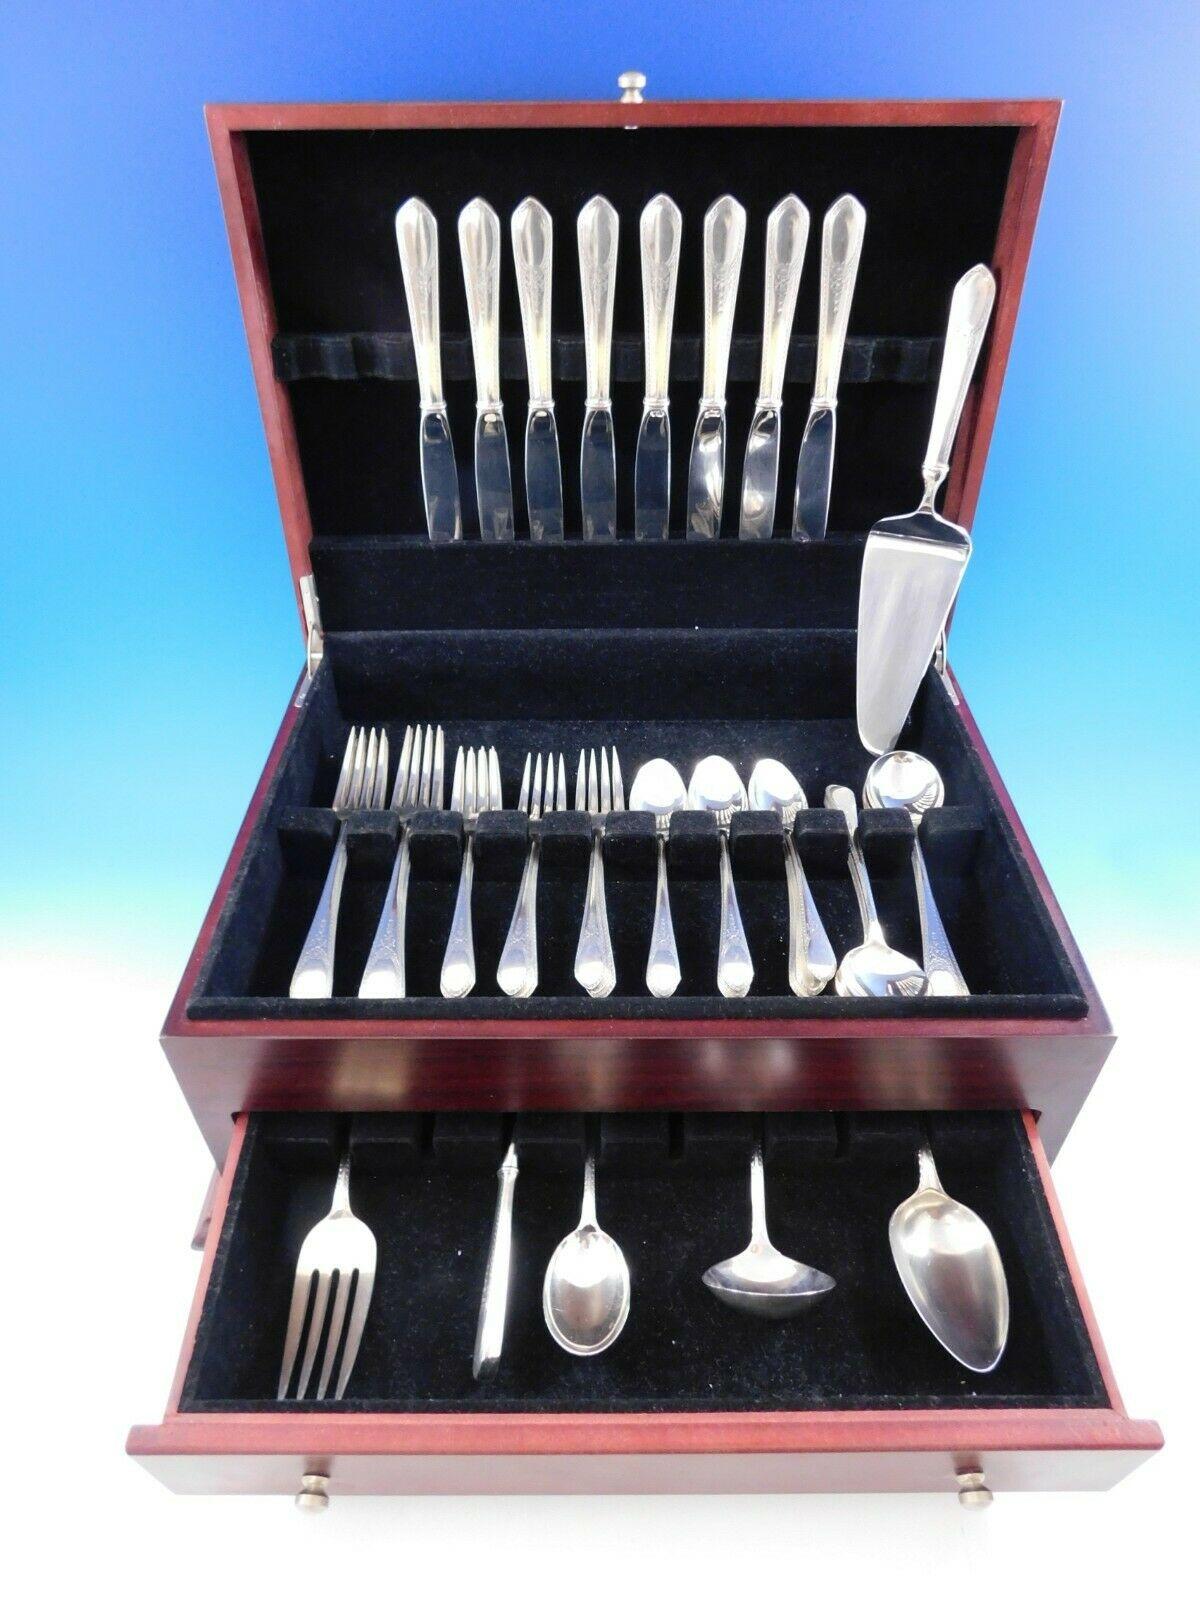 Early American engraved by Lunt sterling silver flatware set, 46 pieces. This set includes:

8 knives, modern blade, 9 1/4